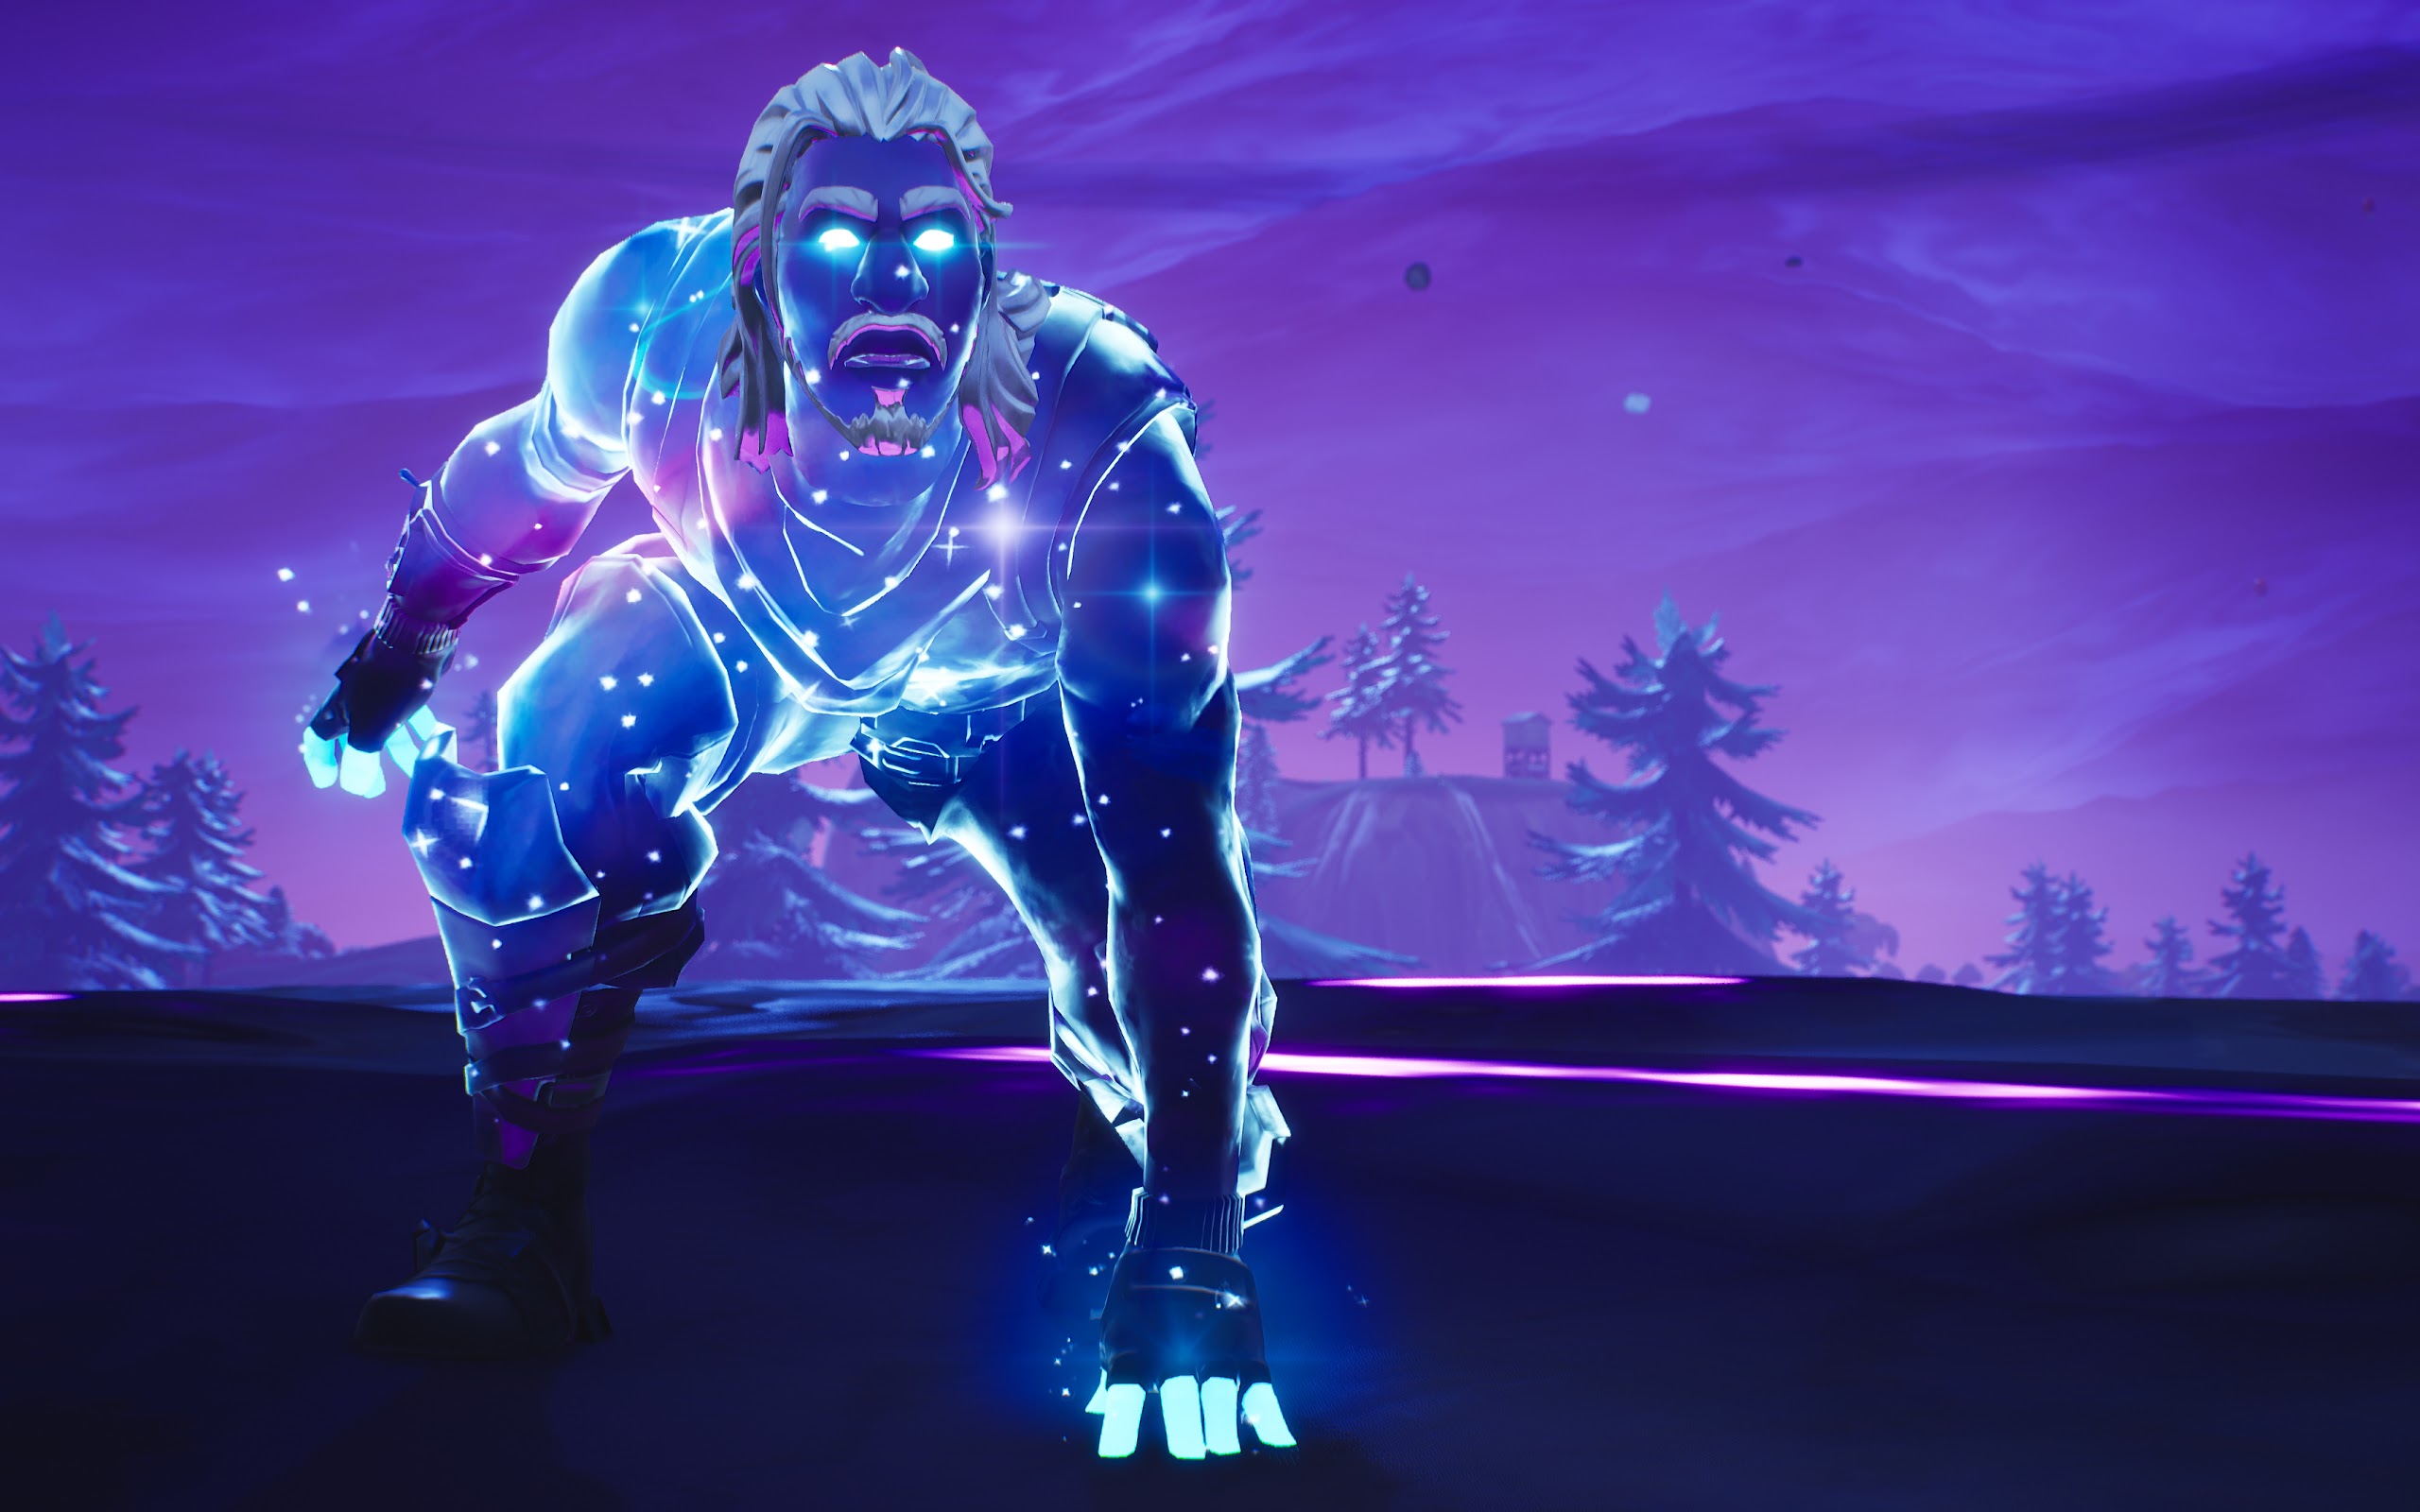 Fortnite Hd Wallpaper Background Image 2560x1600 Id 995792 Wallpaper Abyss